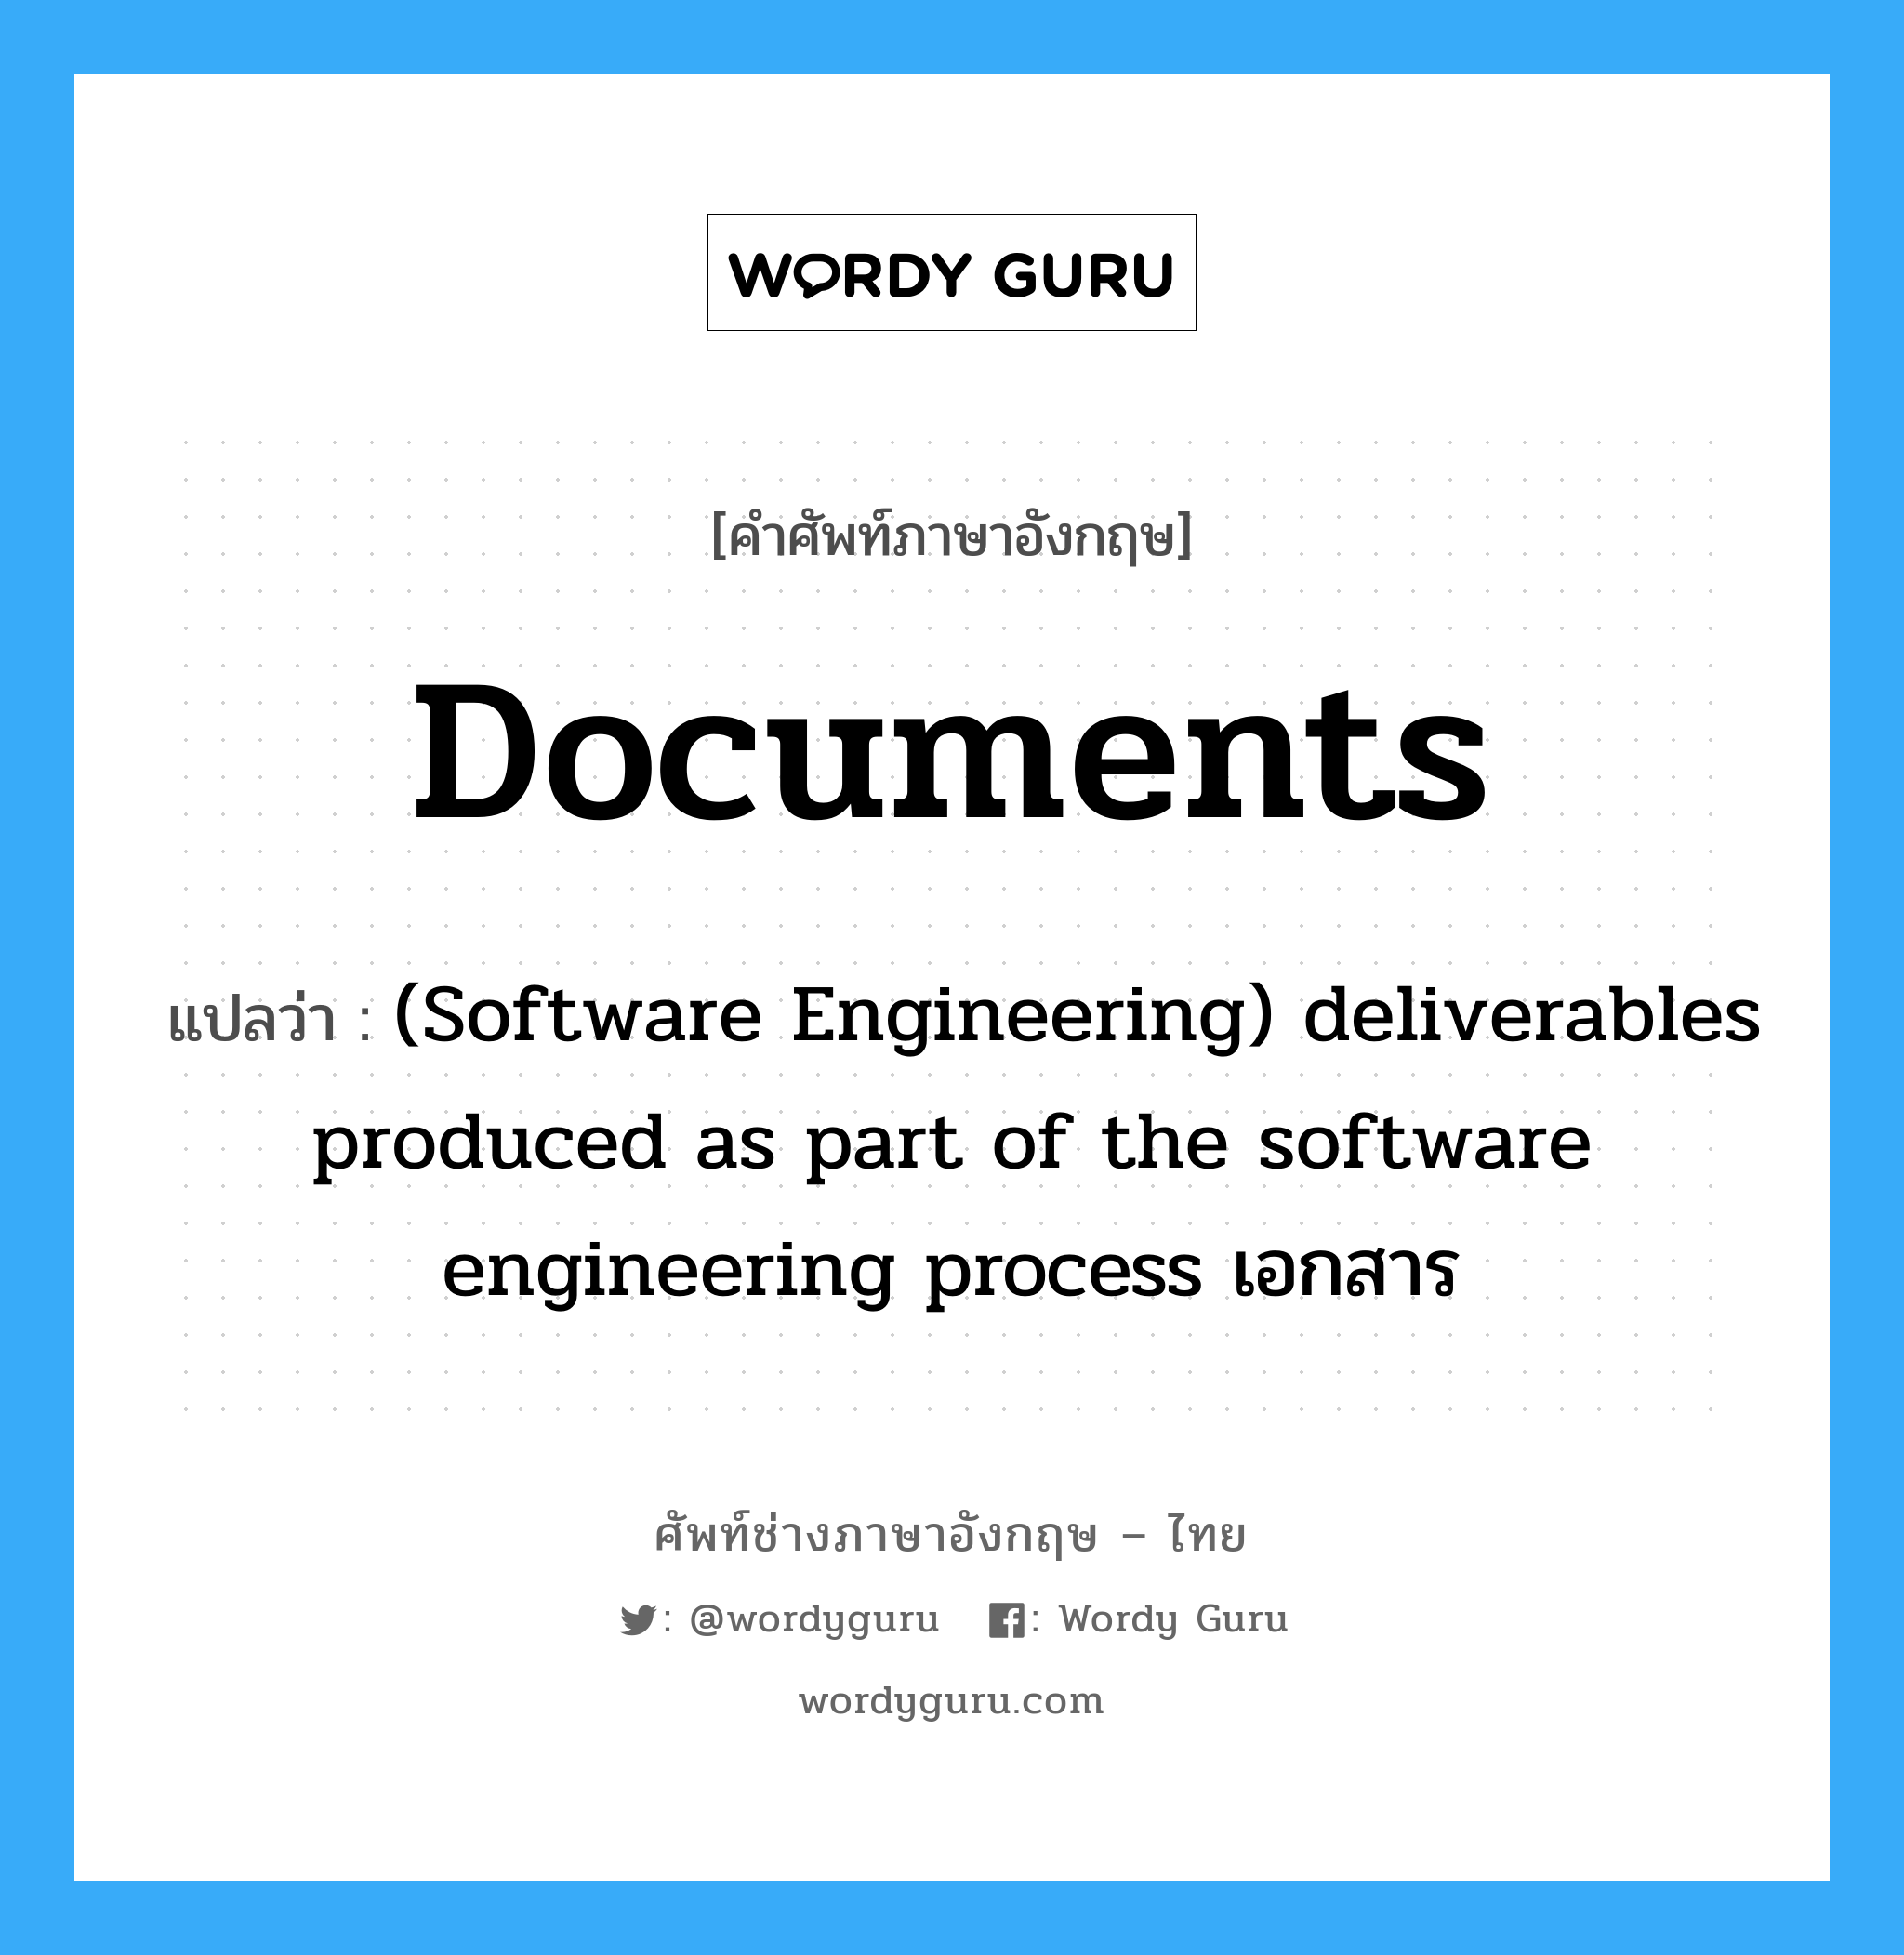 Documents แปลว่า?, คำศัพท์ช่างภาษาอังกฤษ - ไทย Documents คำศัพท์ภาษาอังกฤษ Documents แปลว่า (Software Engineering) deliverables produced as part of the software engineering process เอกสาร